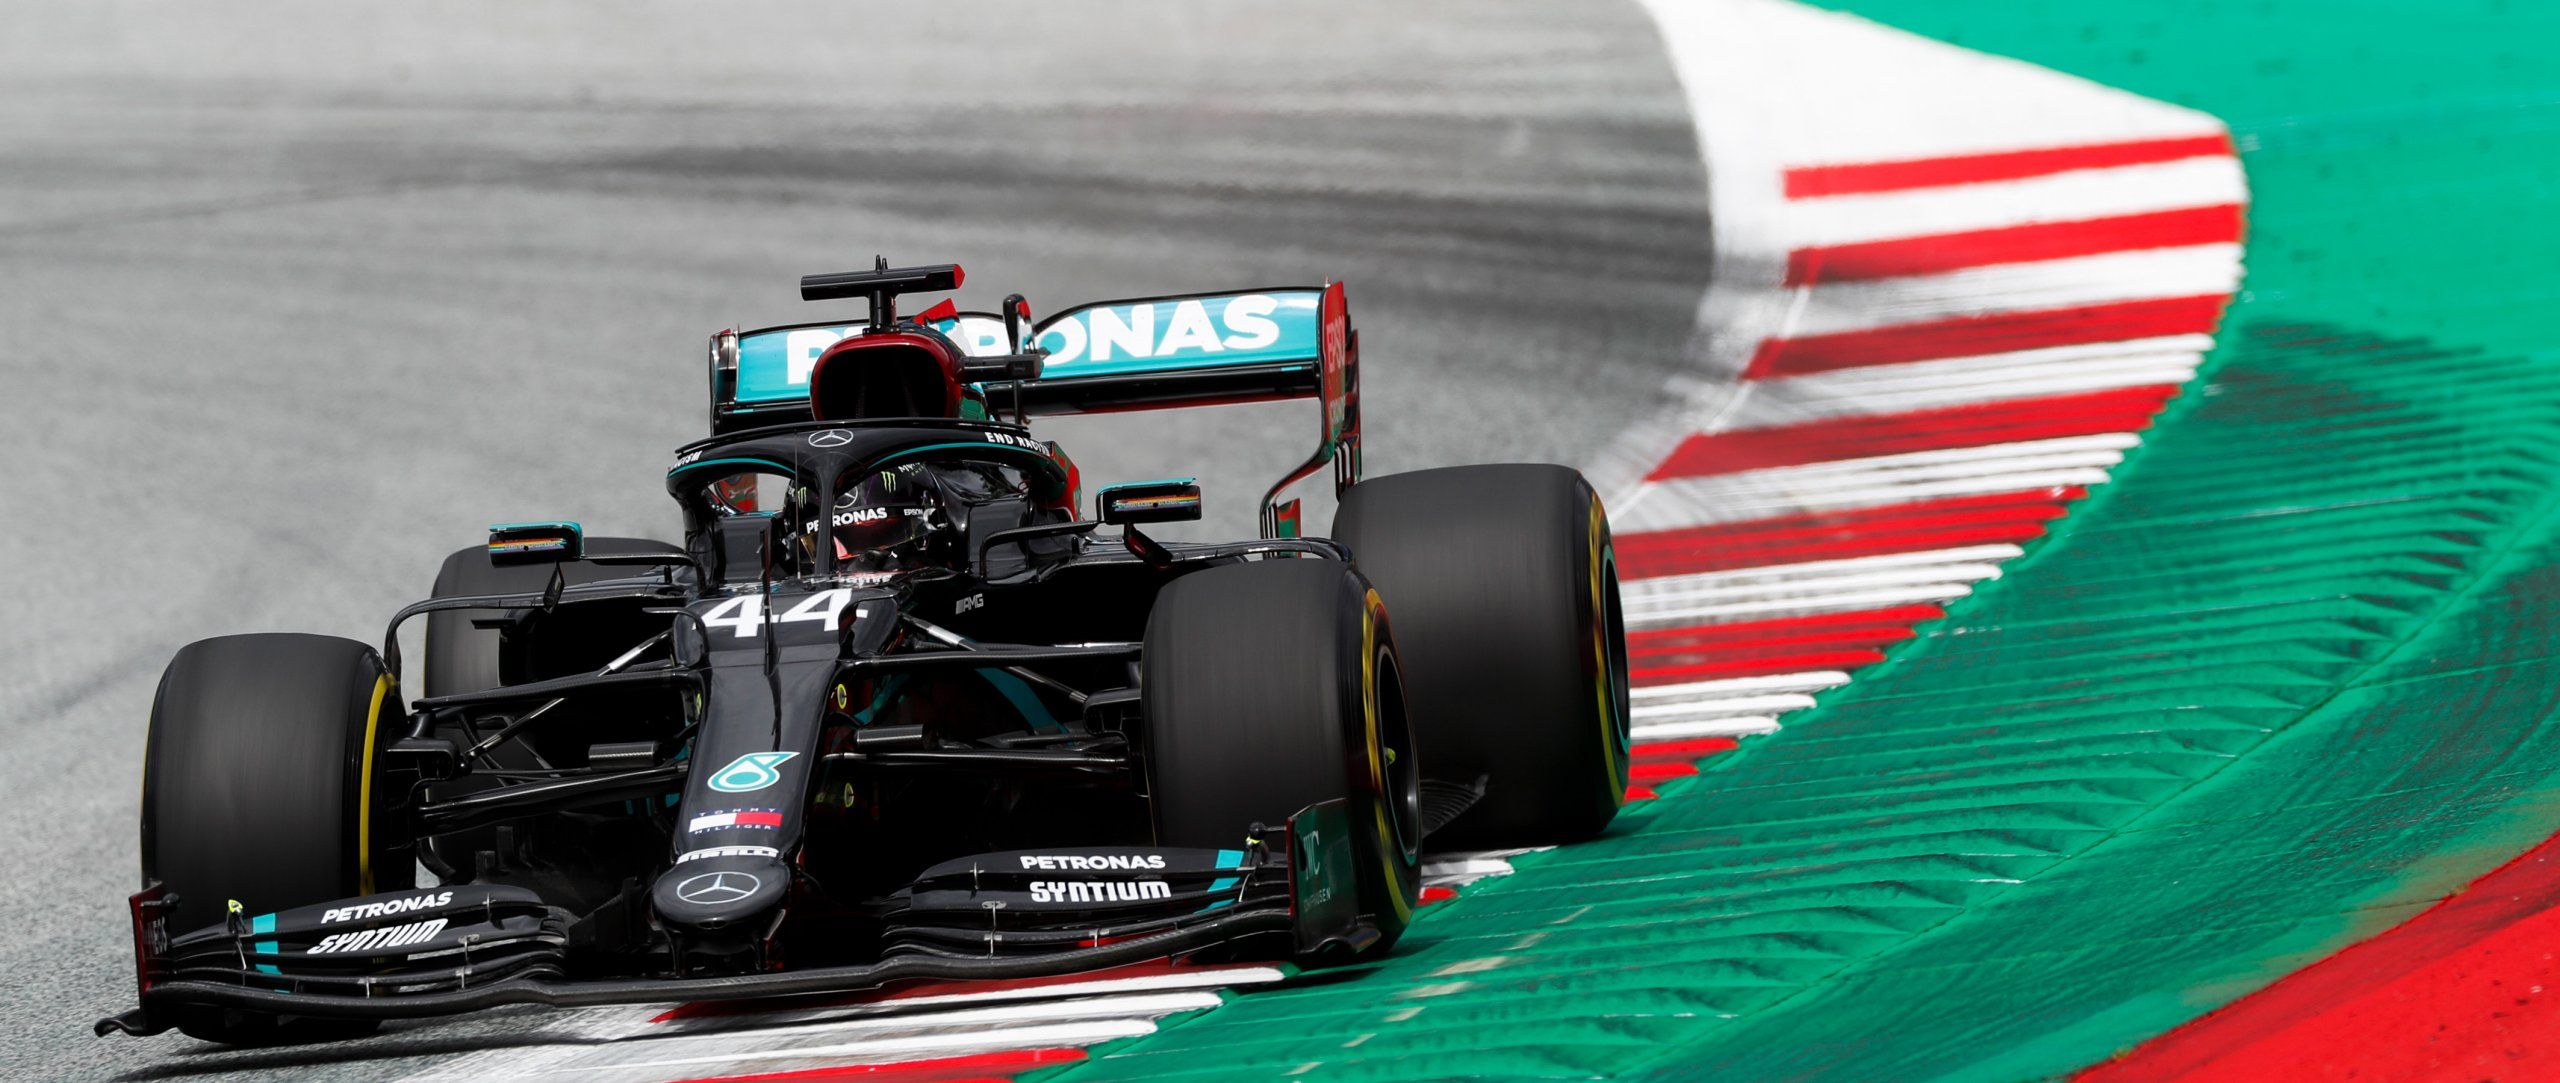 Lewis & Valtteri Finish First Day at the Top of the Timesheets